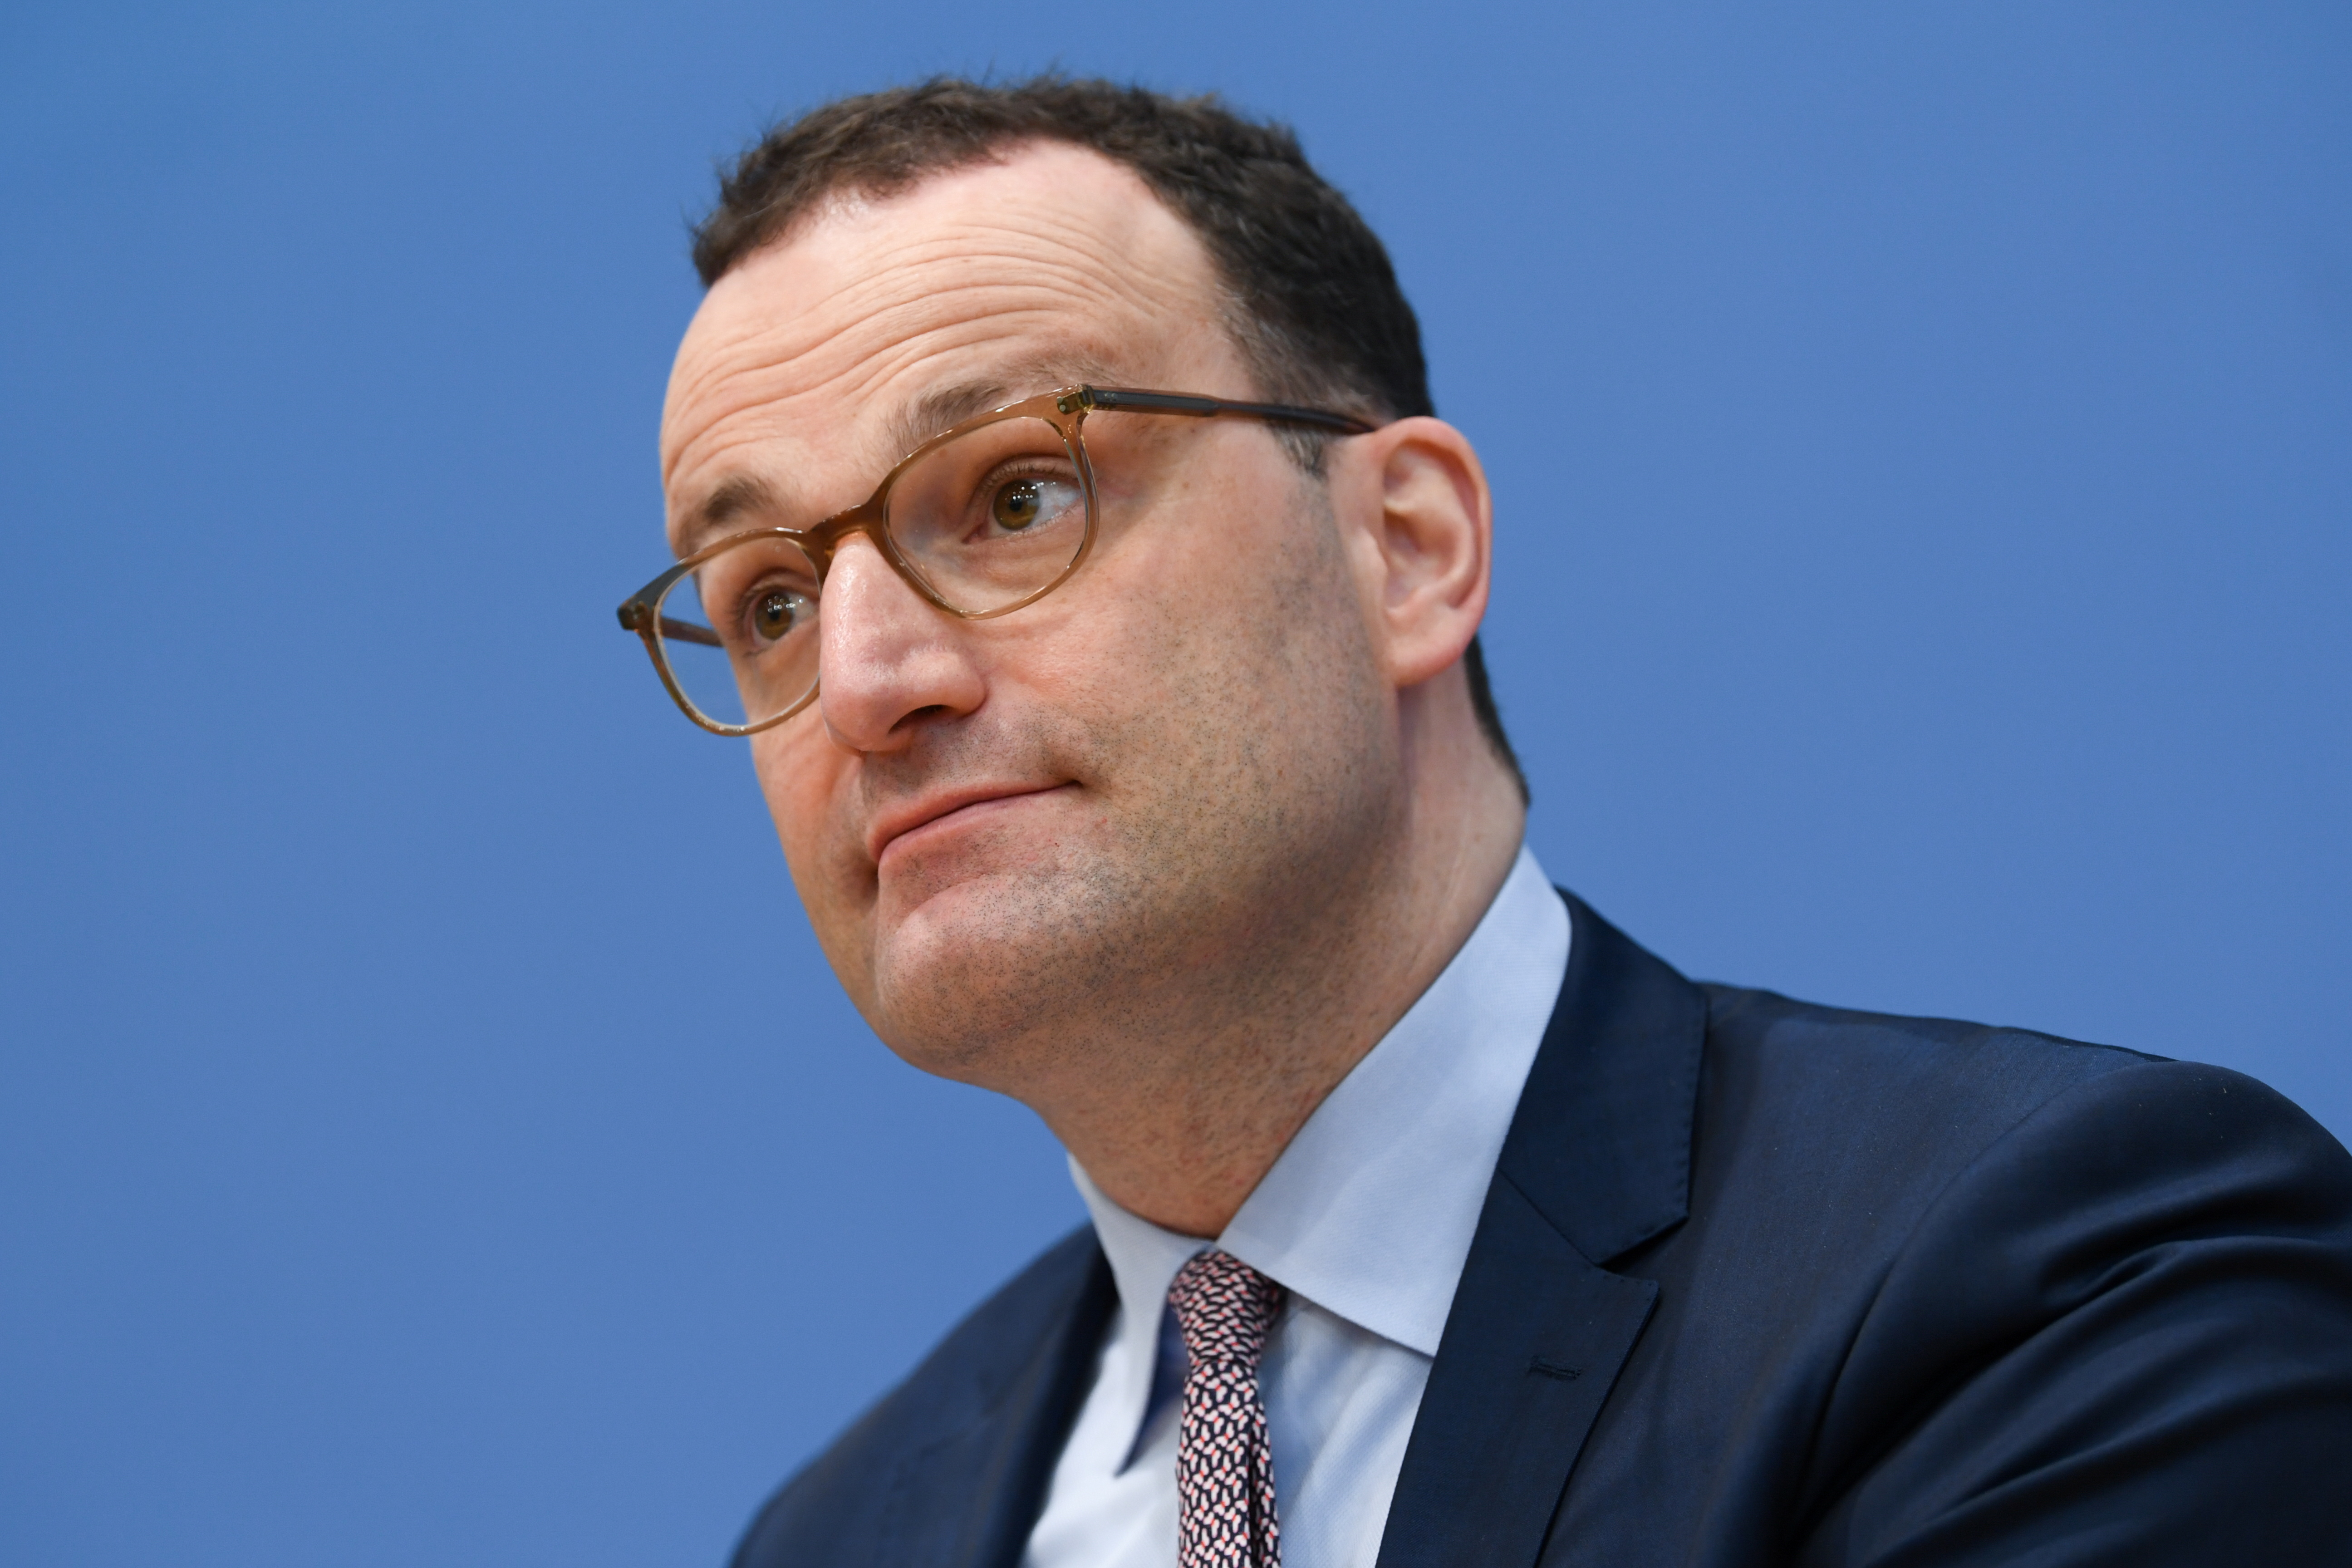 German Health Minister Jens Spahn attends a news conference on the current coronavirus disease (COVID-19) situation in Berlin, Germany May 7, 2021. REUTERS/Annegret Hilse/Pool